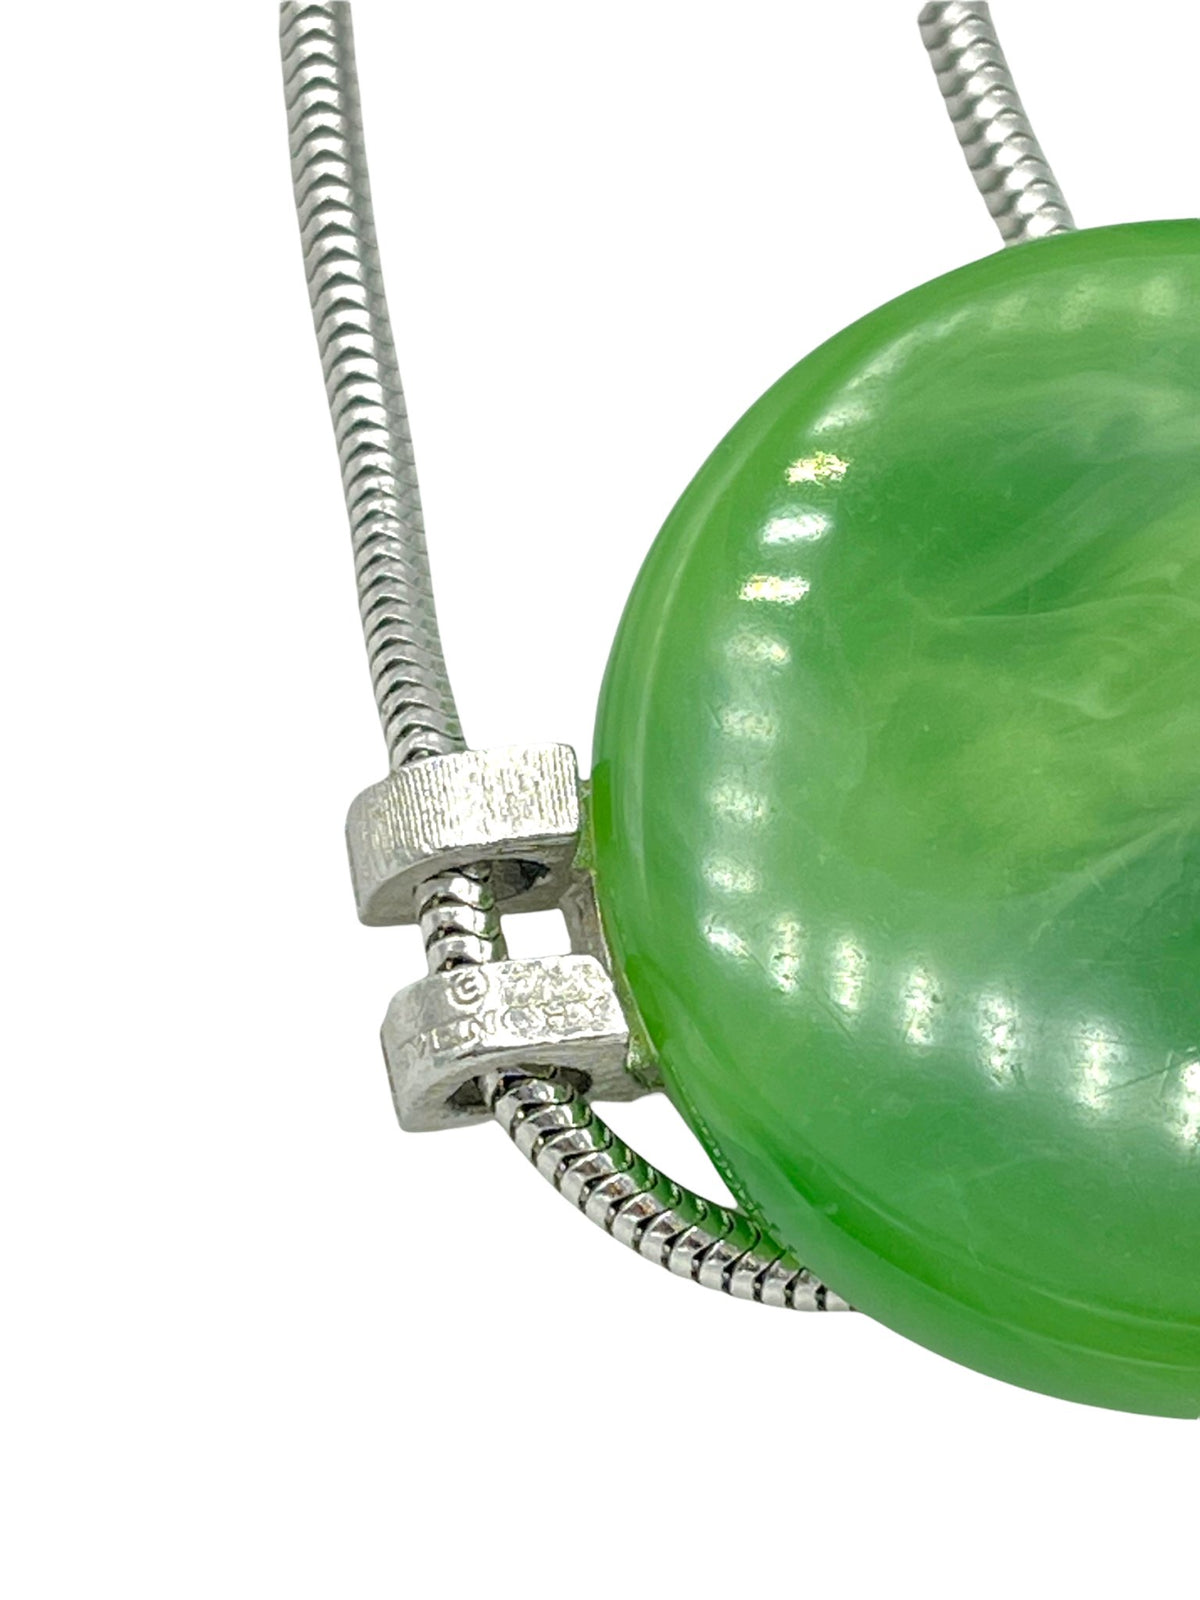 Givenchy Green Jade Art Deco Vintage Pendant with Silver Snake Chain - 24 Wishes Vintage Jewelry